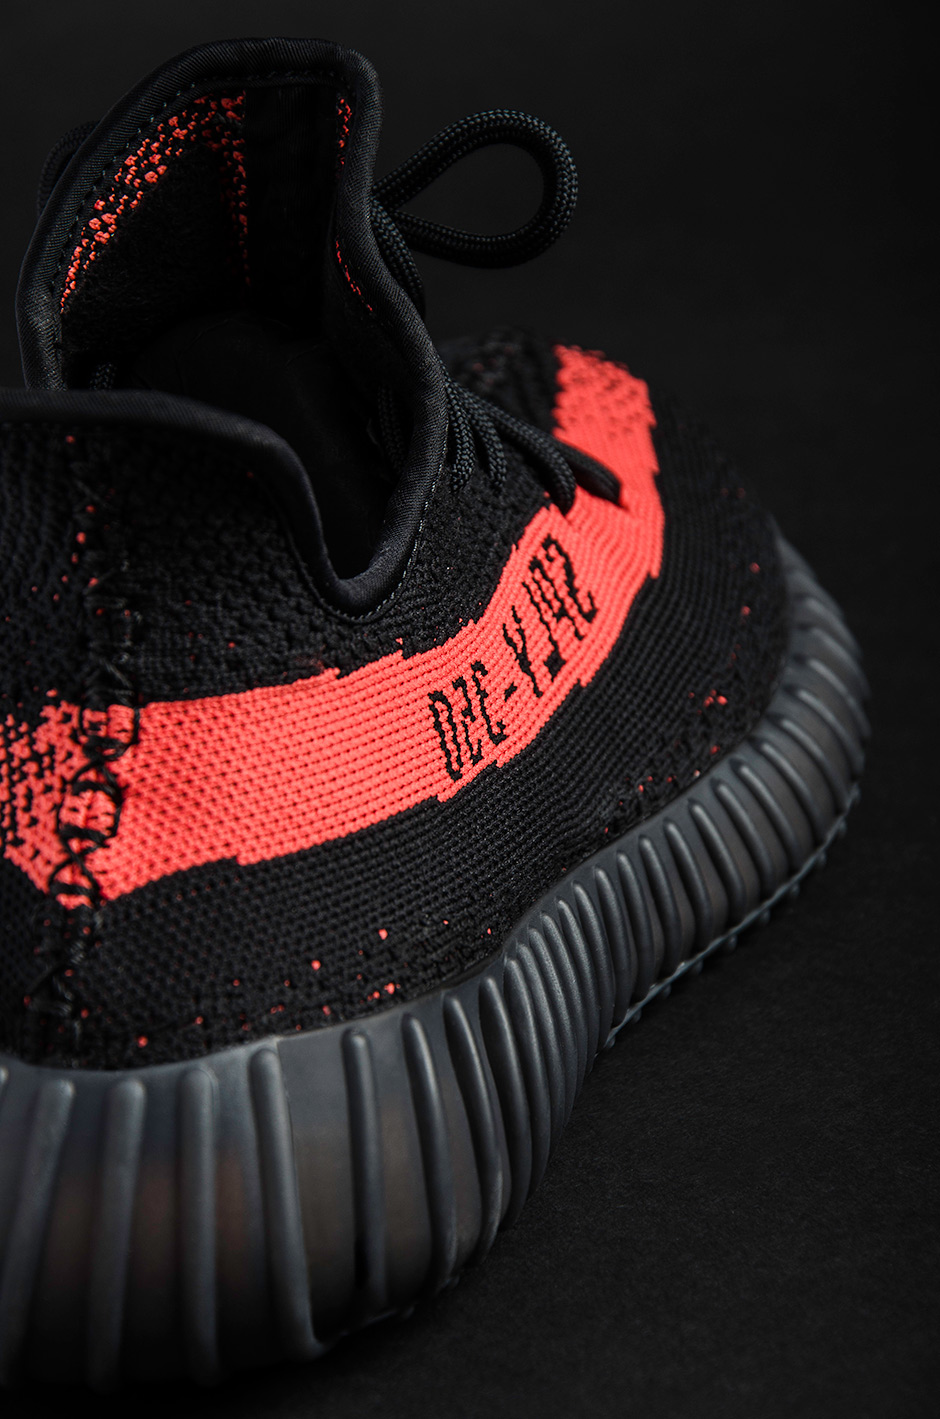 YEEZY BOOST 350 V2 BLACK RED Unboxing On Feet